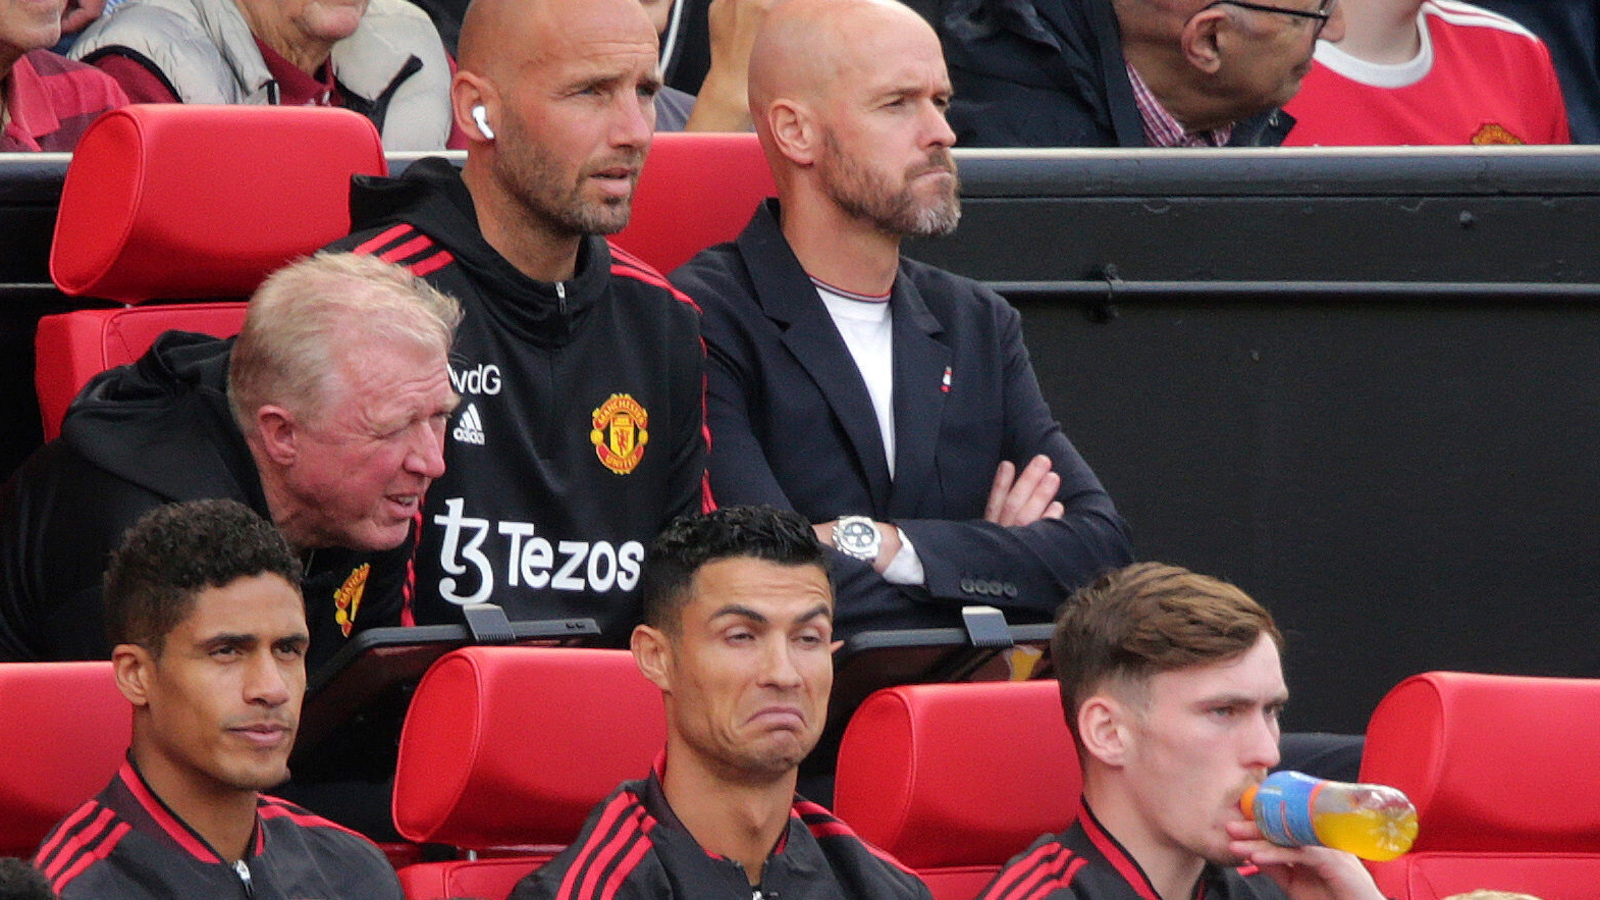 Cristiano Ronaldo ‘brutally axed’ by Erik ten Hag in front of whole Manchester United squad during 2-hour summit meeting